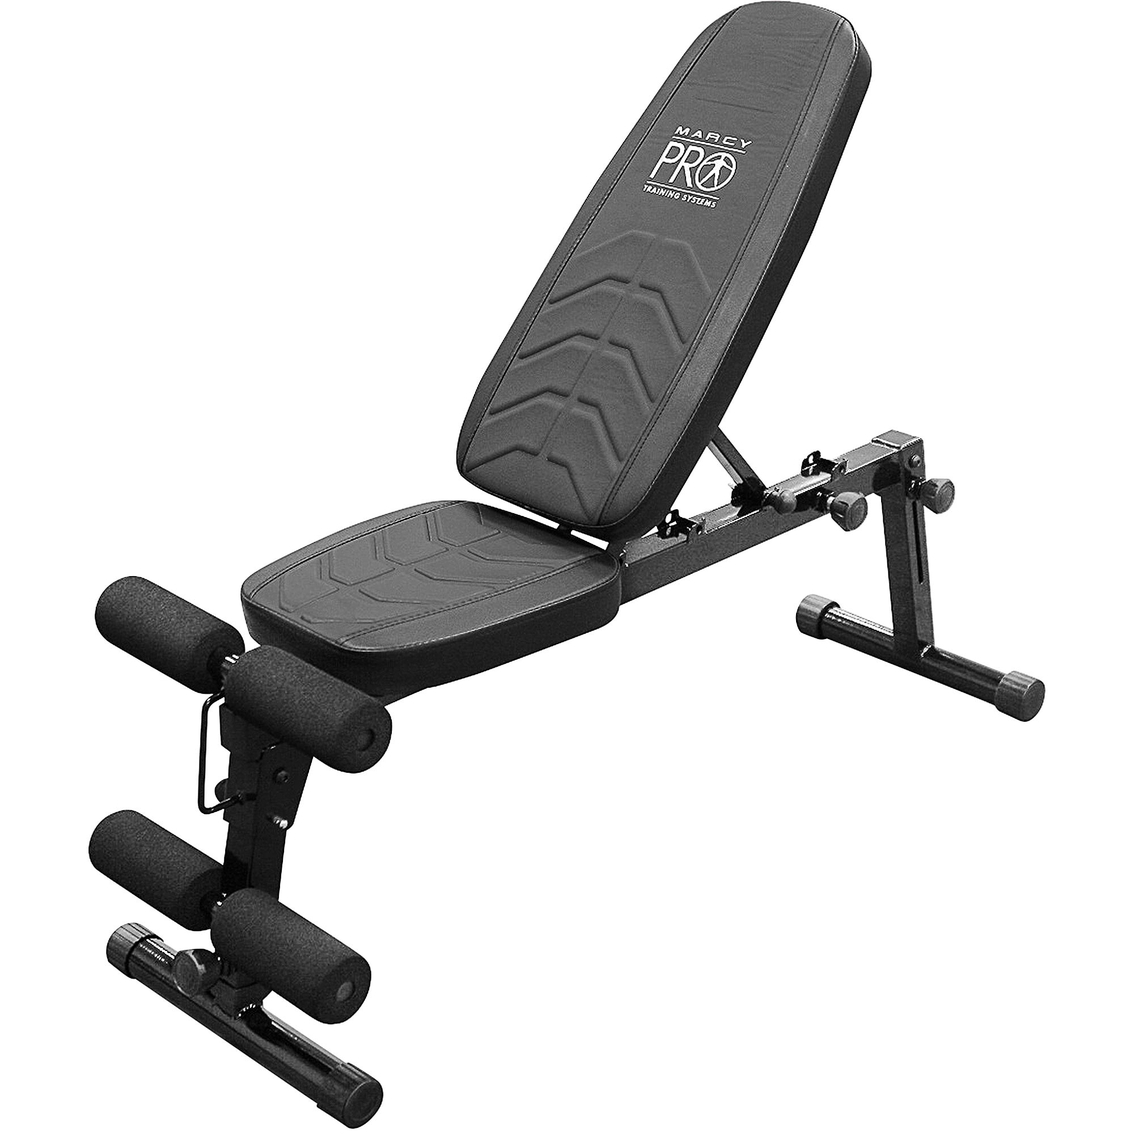 Impex Marcy Deluxe Utility Bench PM10110 - Image 2 of 2